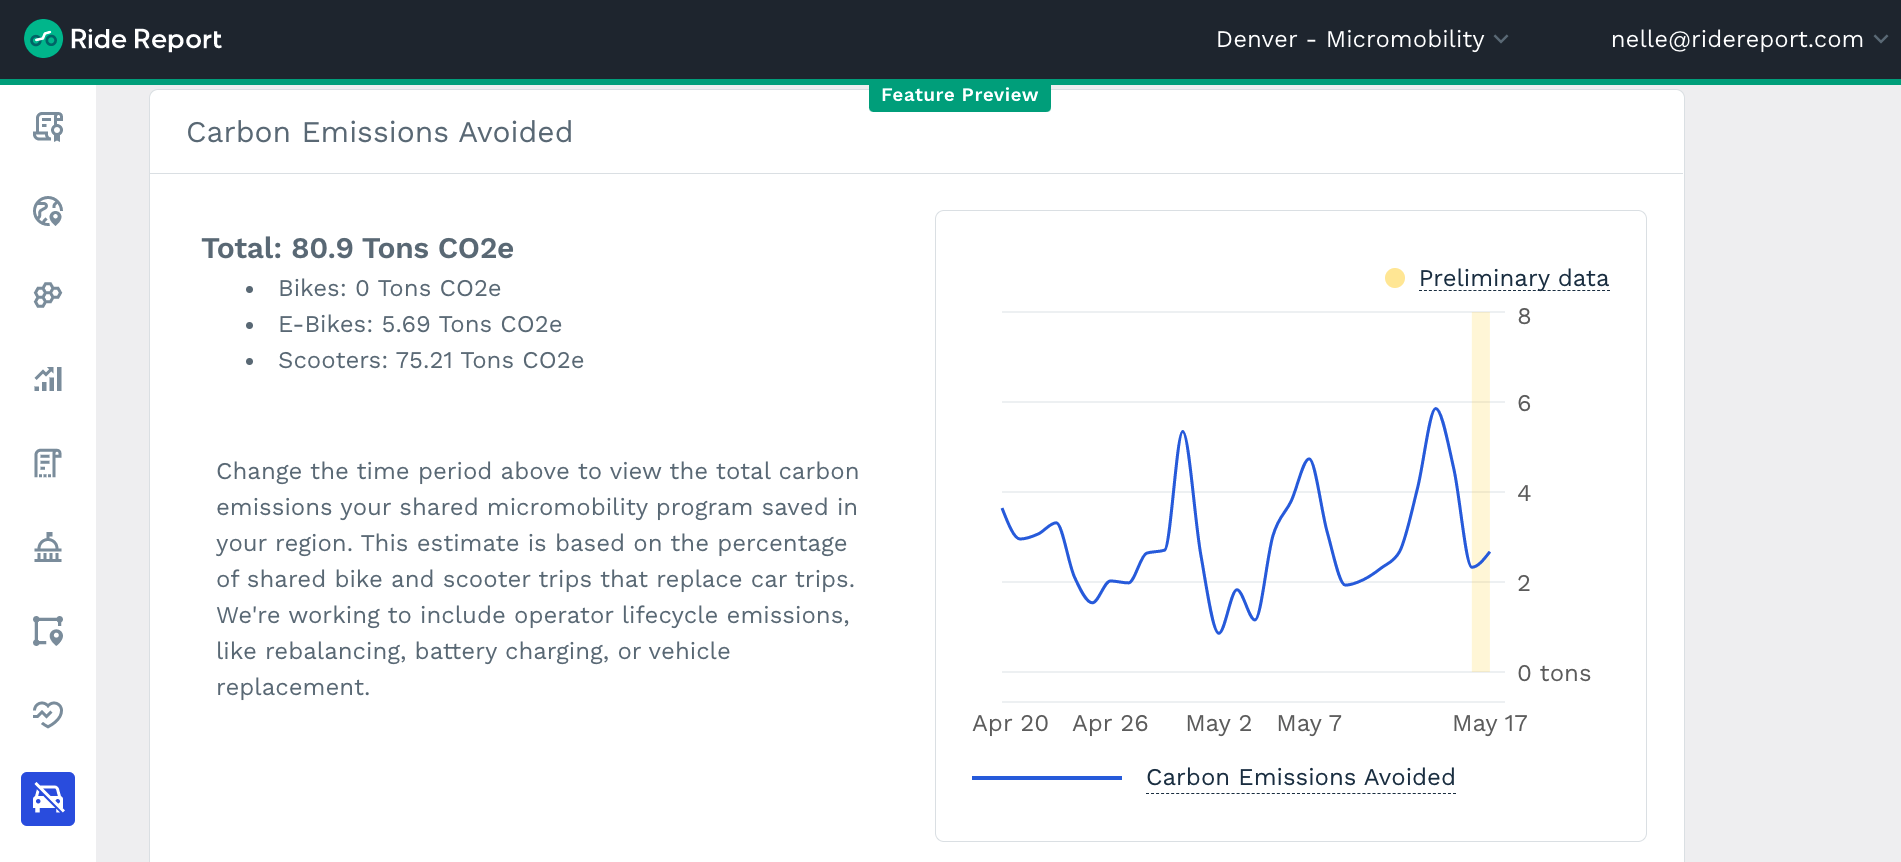 View our carbon emissions avoided graph, and the number of tons of C02 avoided by shared bikes and scooters.